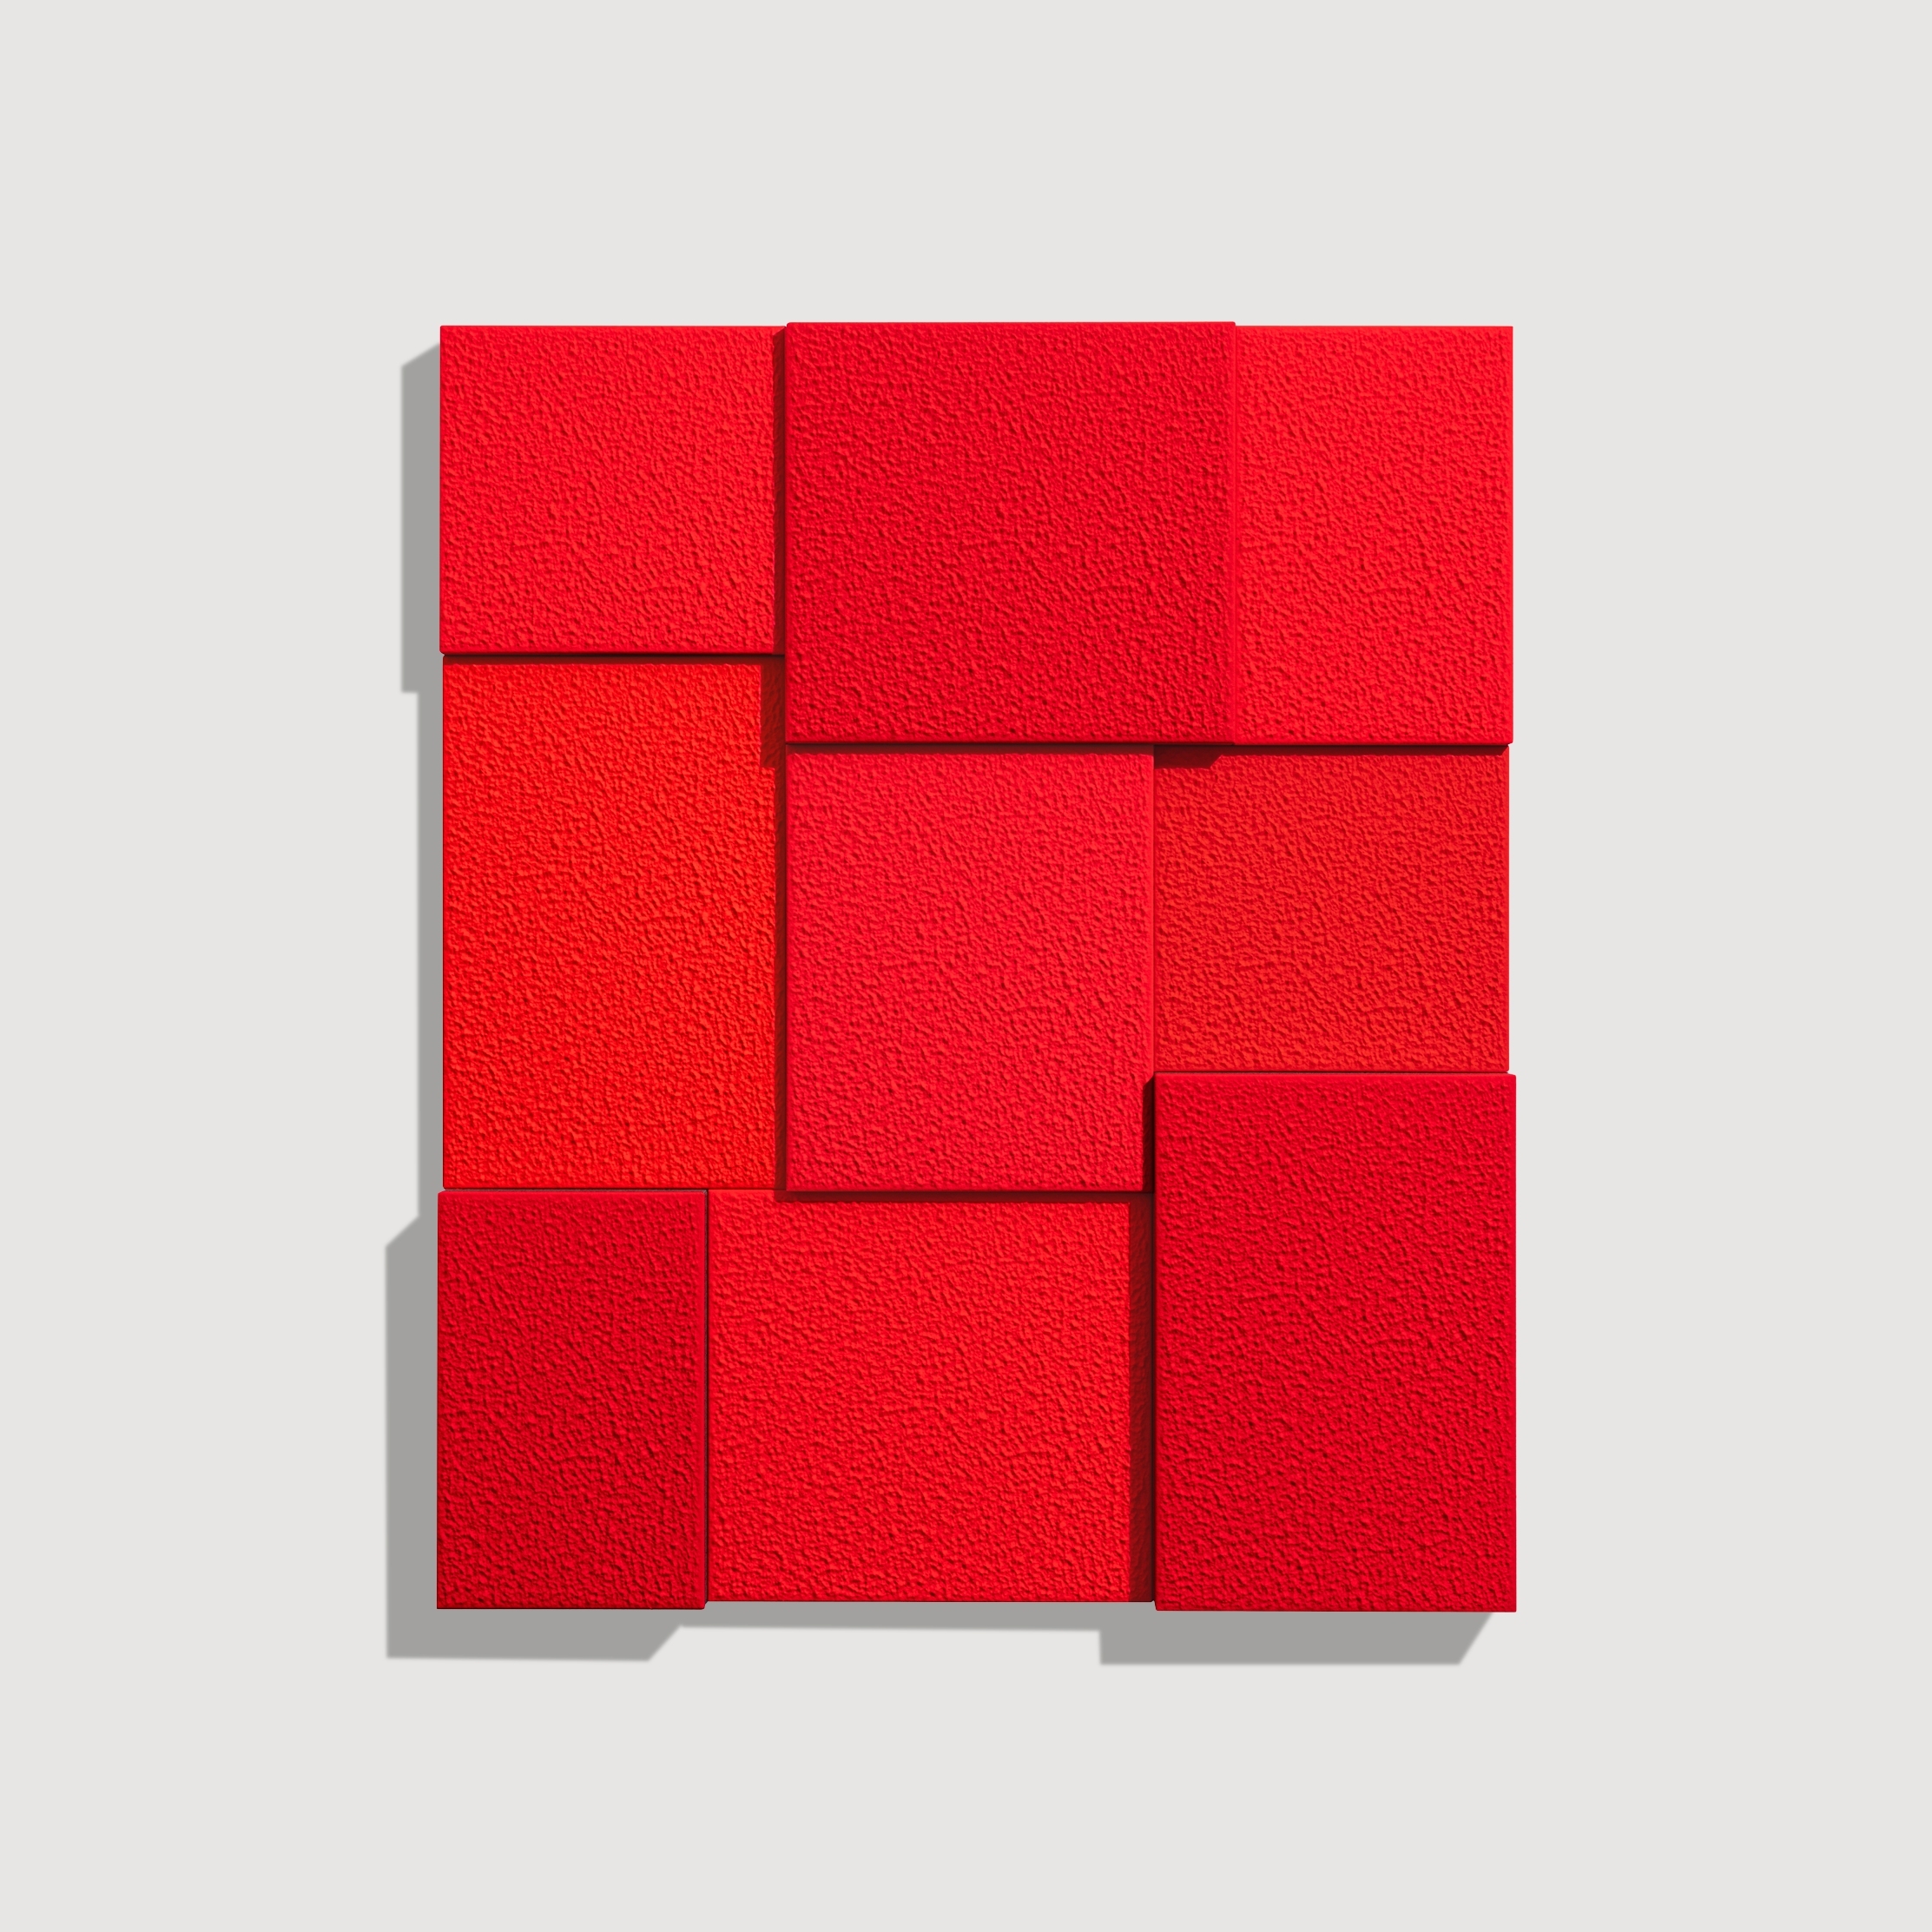 Peter Halley - Red, Nine Times 1/5